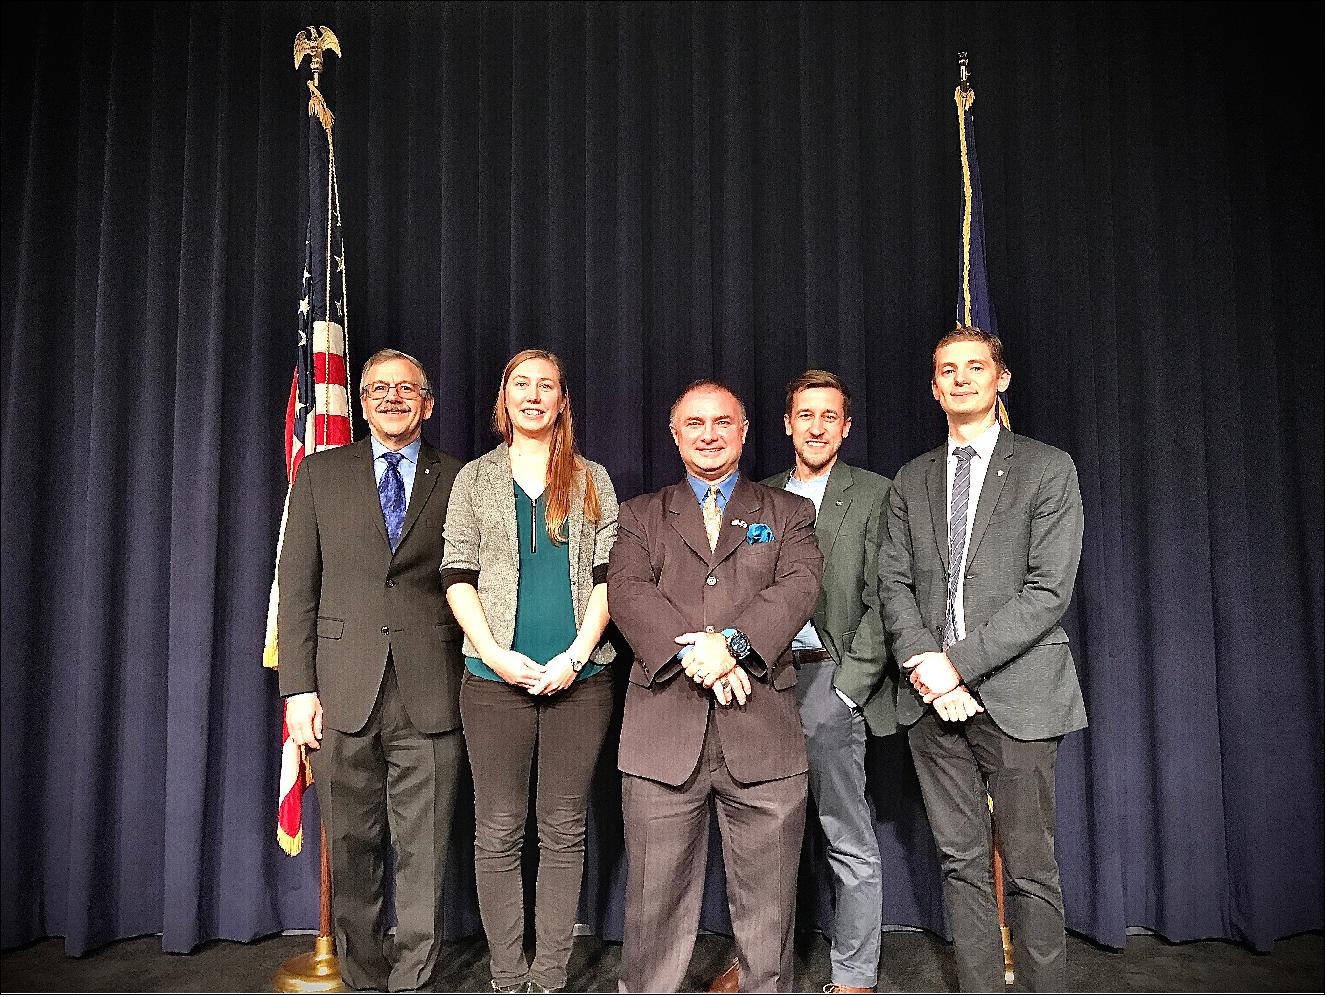 Figure 13: The Goddard PNT policy team receiving a 2019 Agency Honor Award for their advocacy of NASA’s interests in GNSS. From right to left: Frank Bauer, Jenny Donaldson, J. J. Miller, Ben Ashman, and Joel Parker. Not pictured, Lauren Schlenker (image credit: NASA)